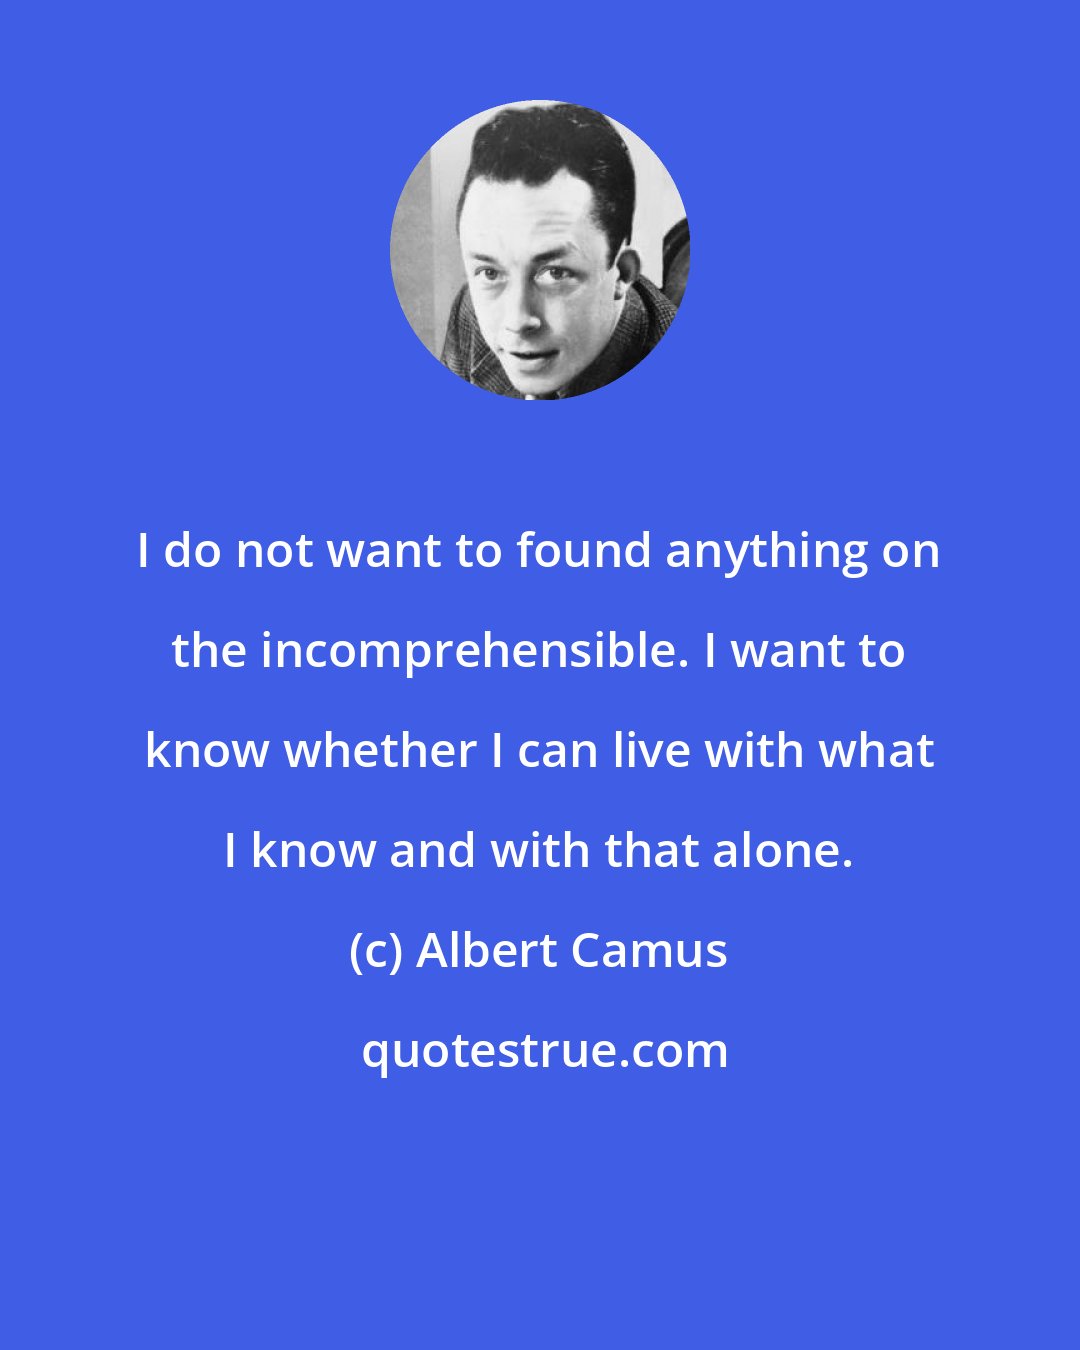 Albert Camus: I do not want to found anything on the incomprehensible. I want to know whether I can live with what I know and with that alone.